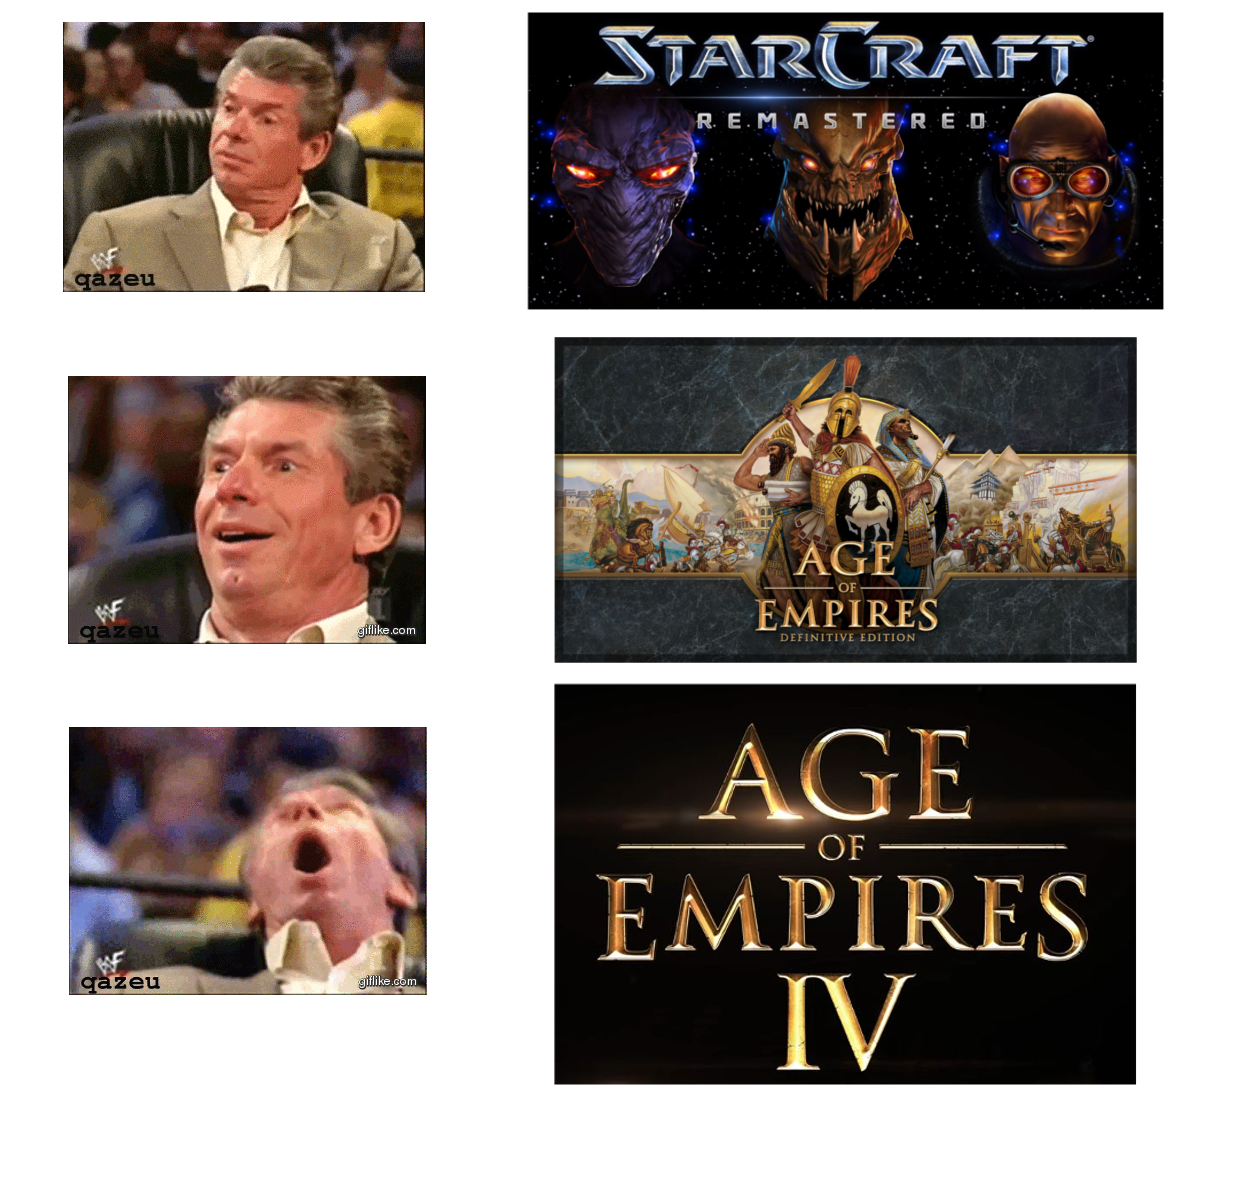 Funny reaction meme of going crazy for Age of Empires IV